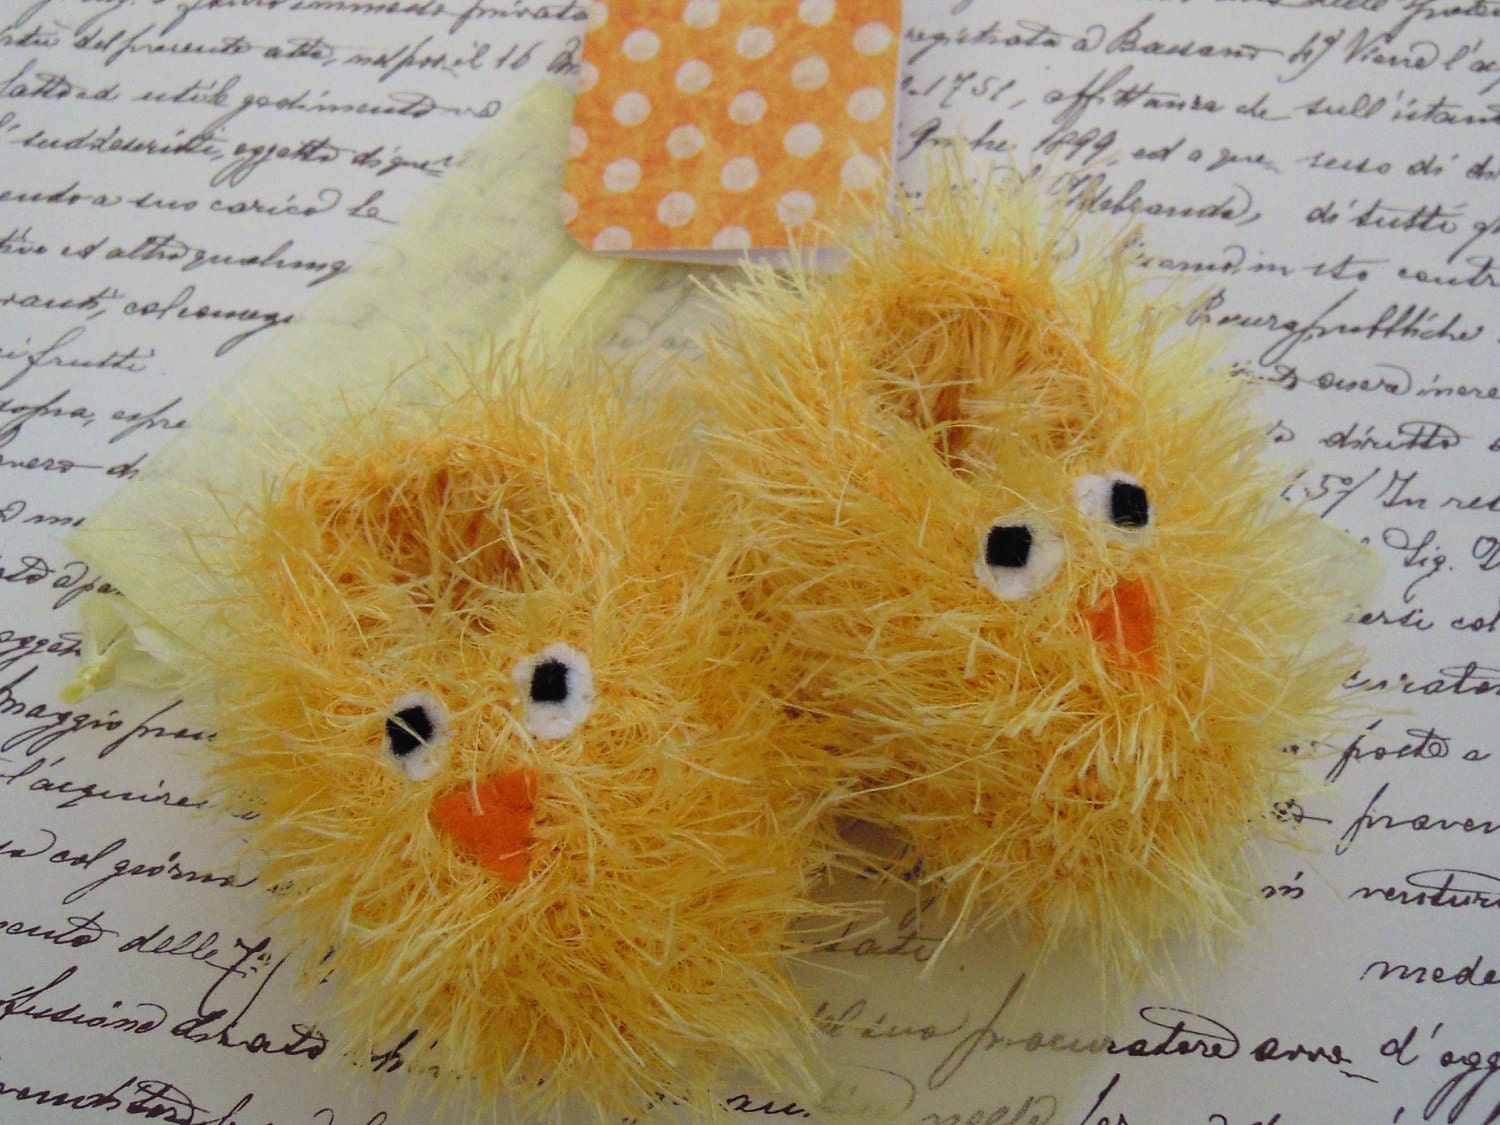 Easter chick baby gift set - fluffy hand knitted yellow bird booties, matching gift bag and polka dot gift card